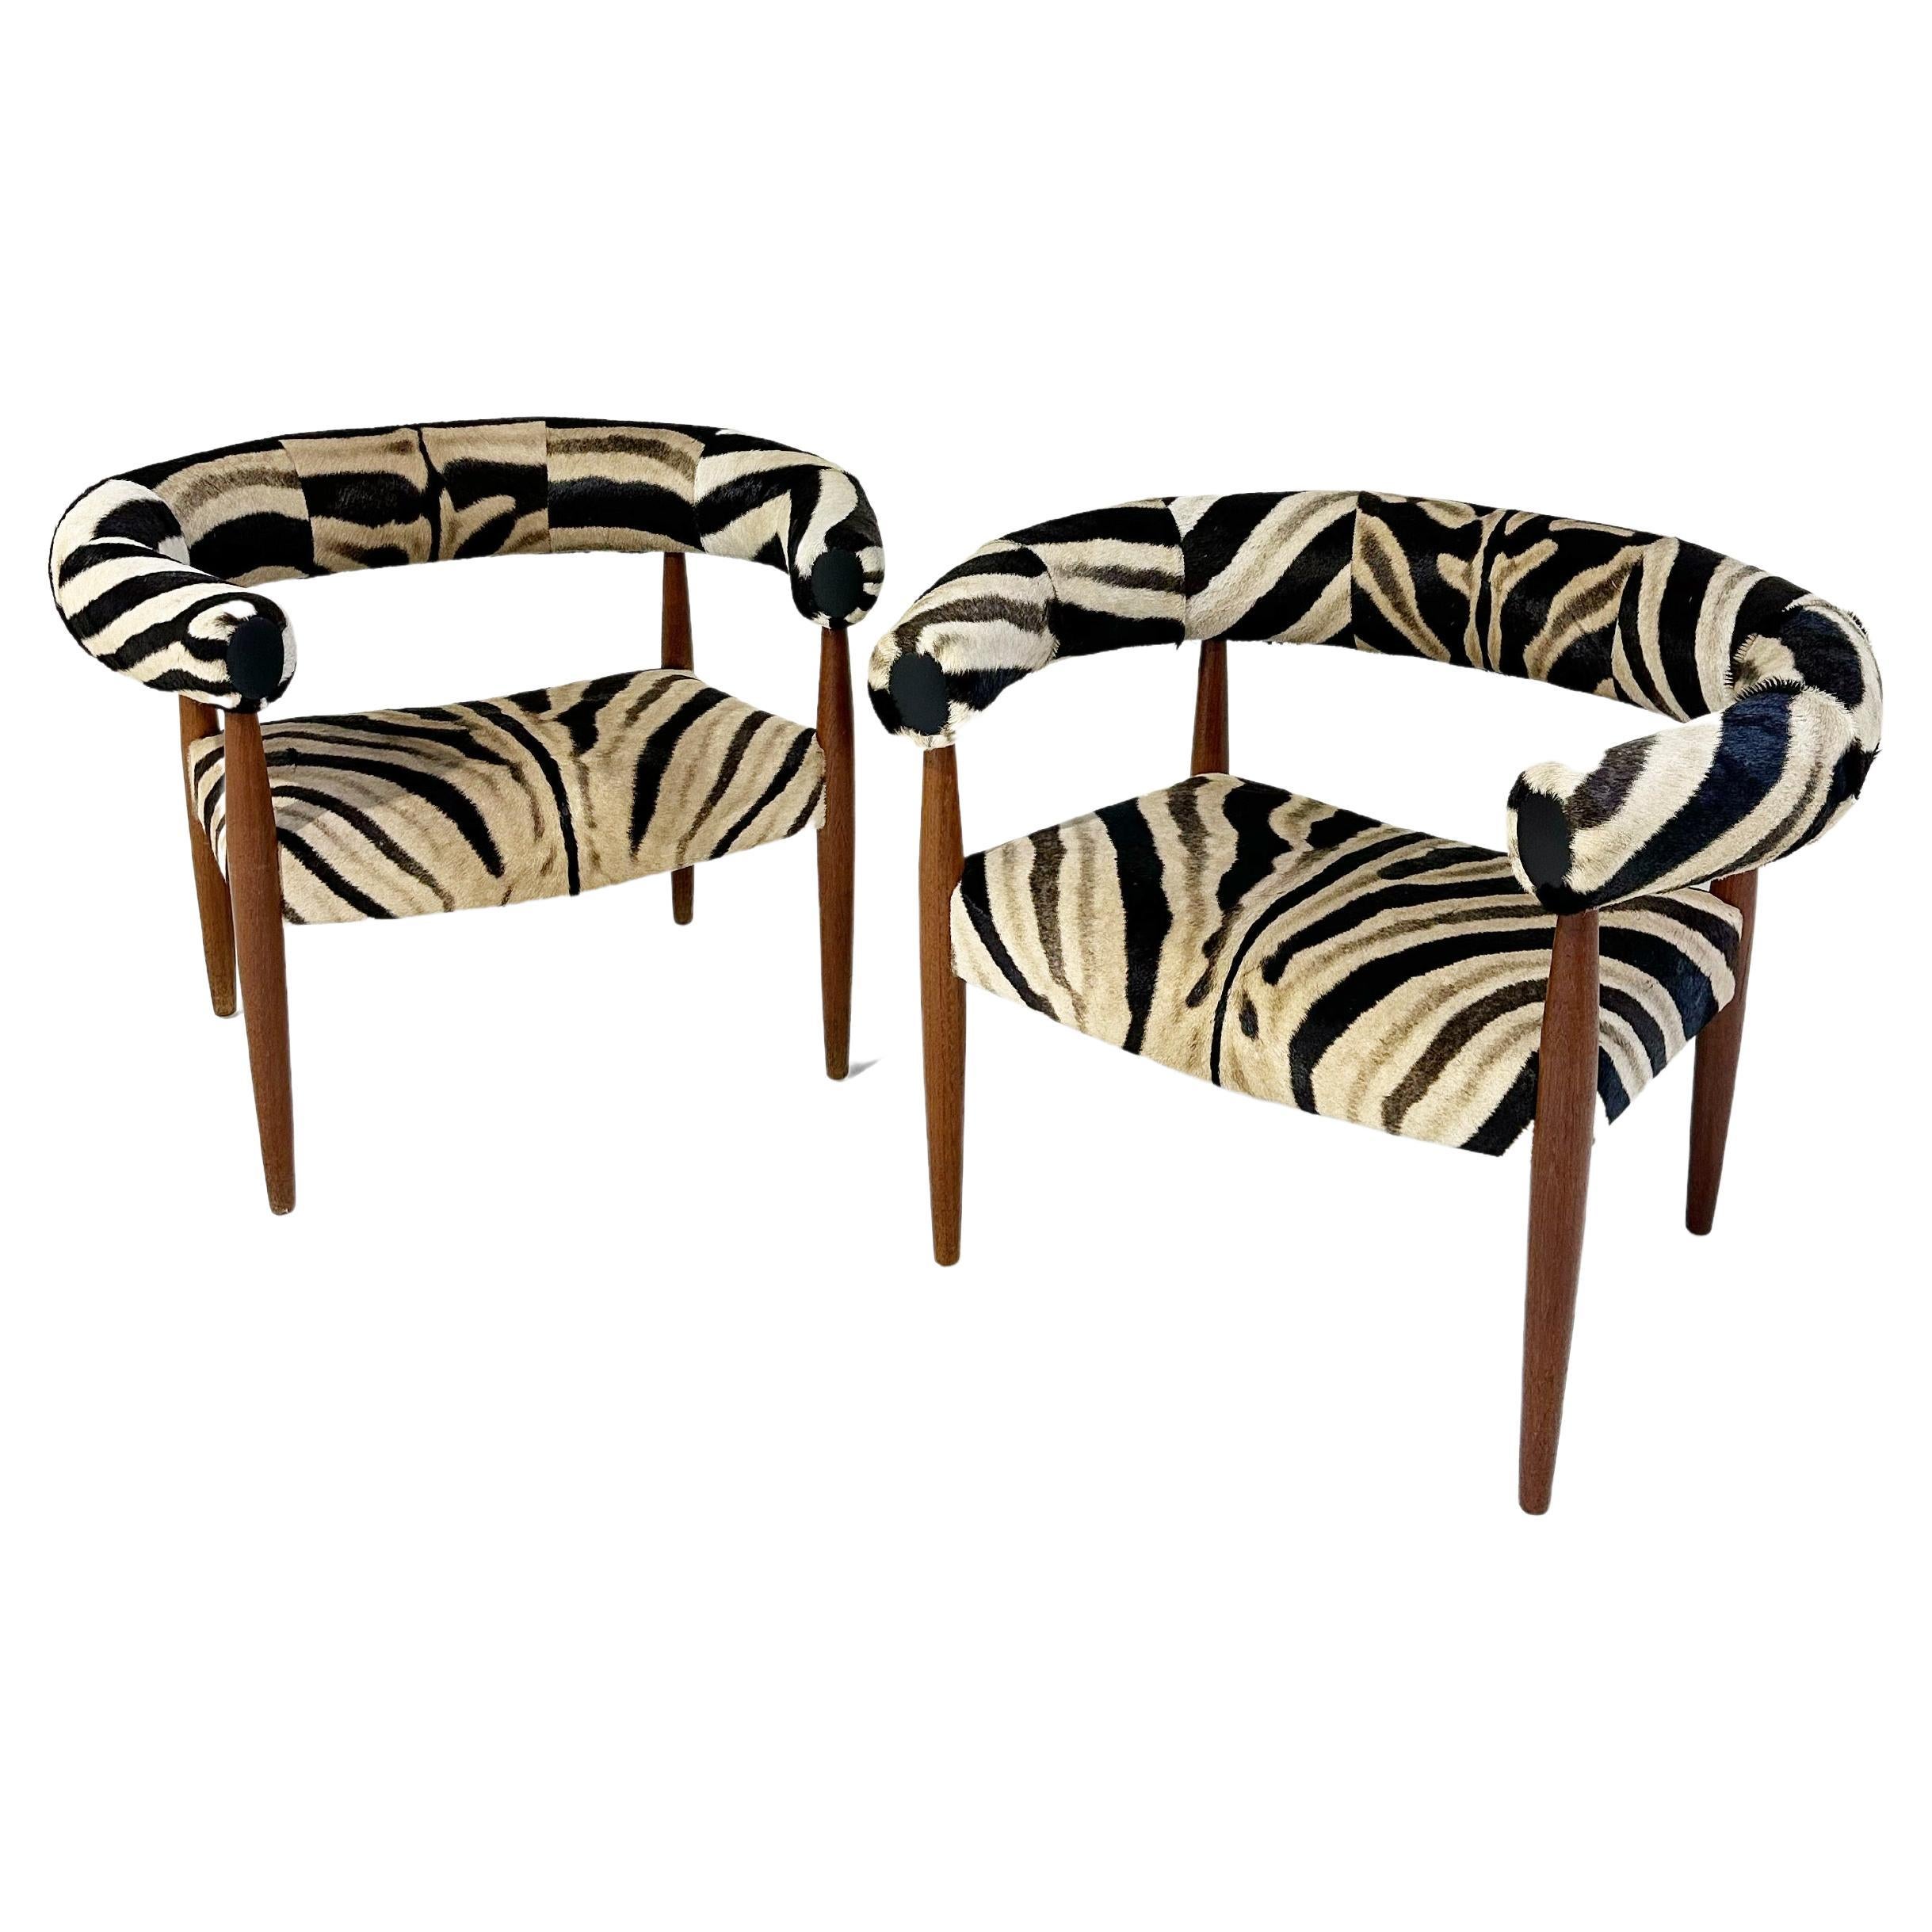 Vintage Nanna and Jorgen Ditzel Ring Lounge Chairs in Zebra Hide For Sale